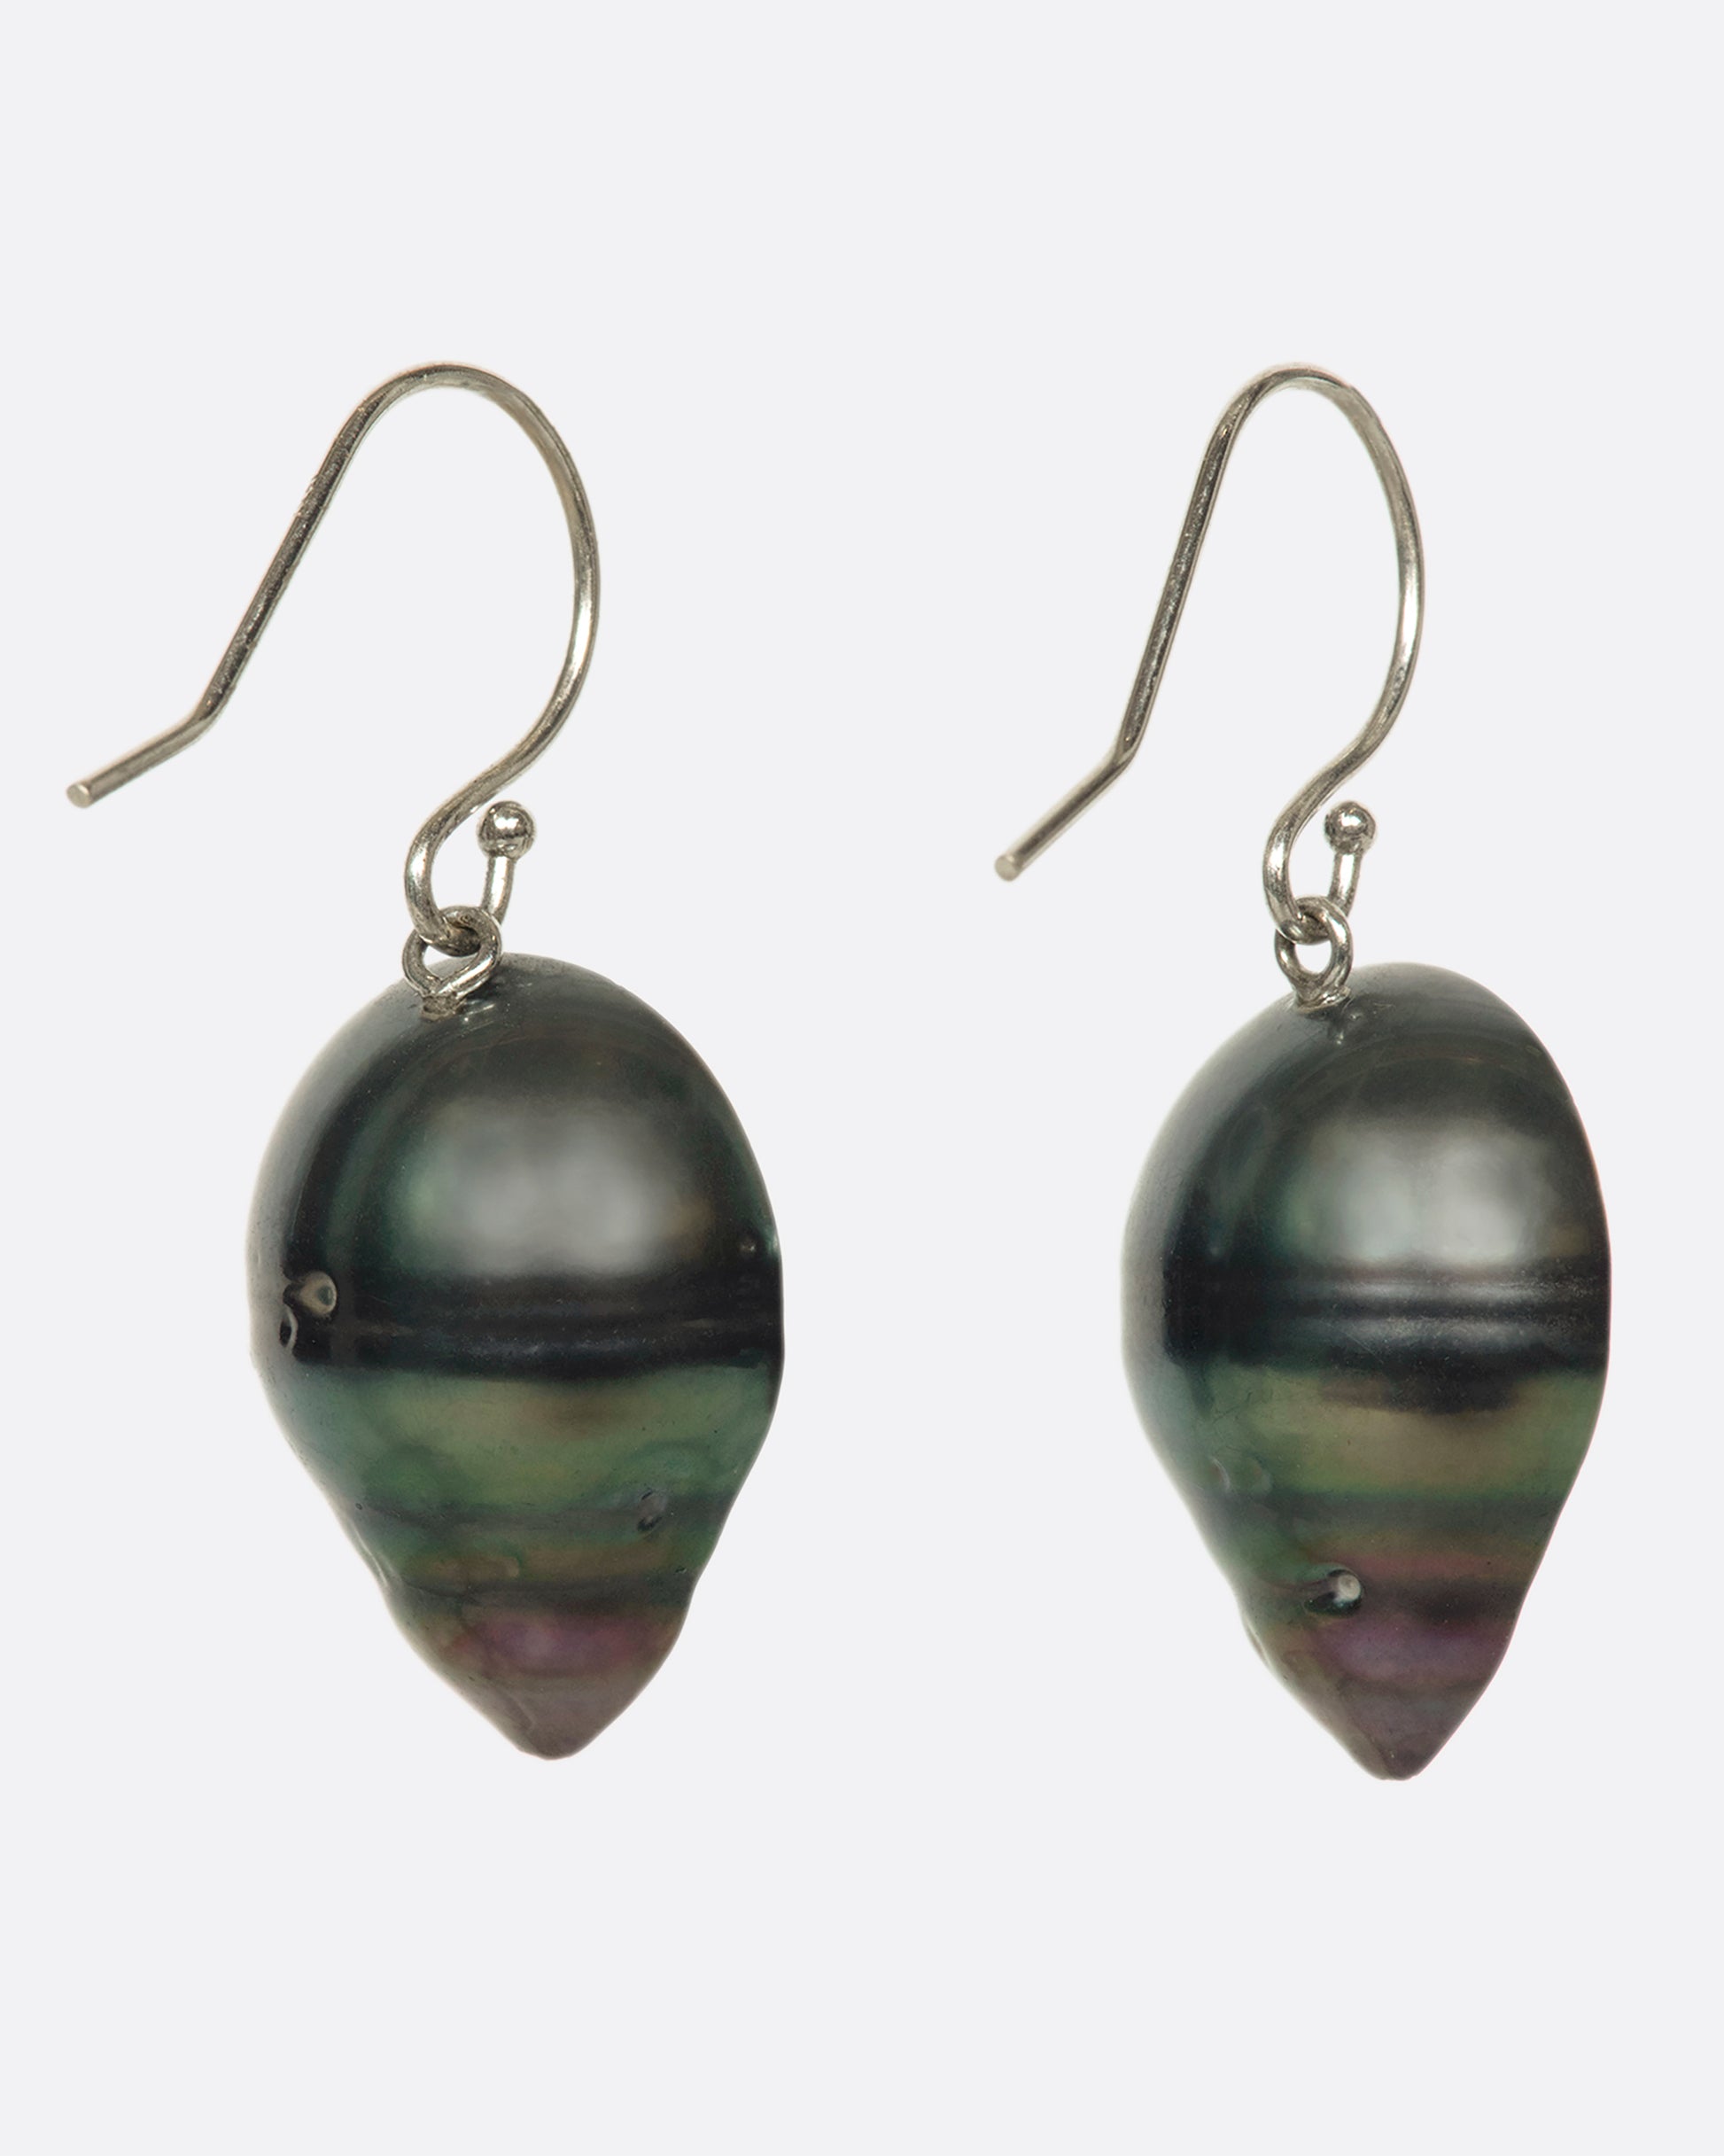 XA stunning pair of Tahitian baroque pearls with 14k white gold hooks. The black pearl with green and purple iridescence are lined with reclaimed black diamonds and full of wicked sparkle.